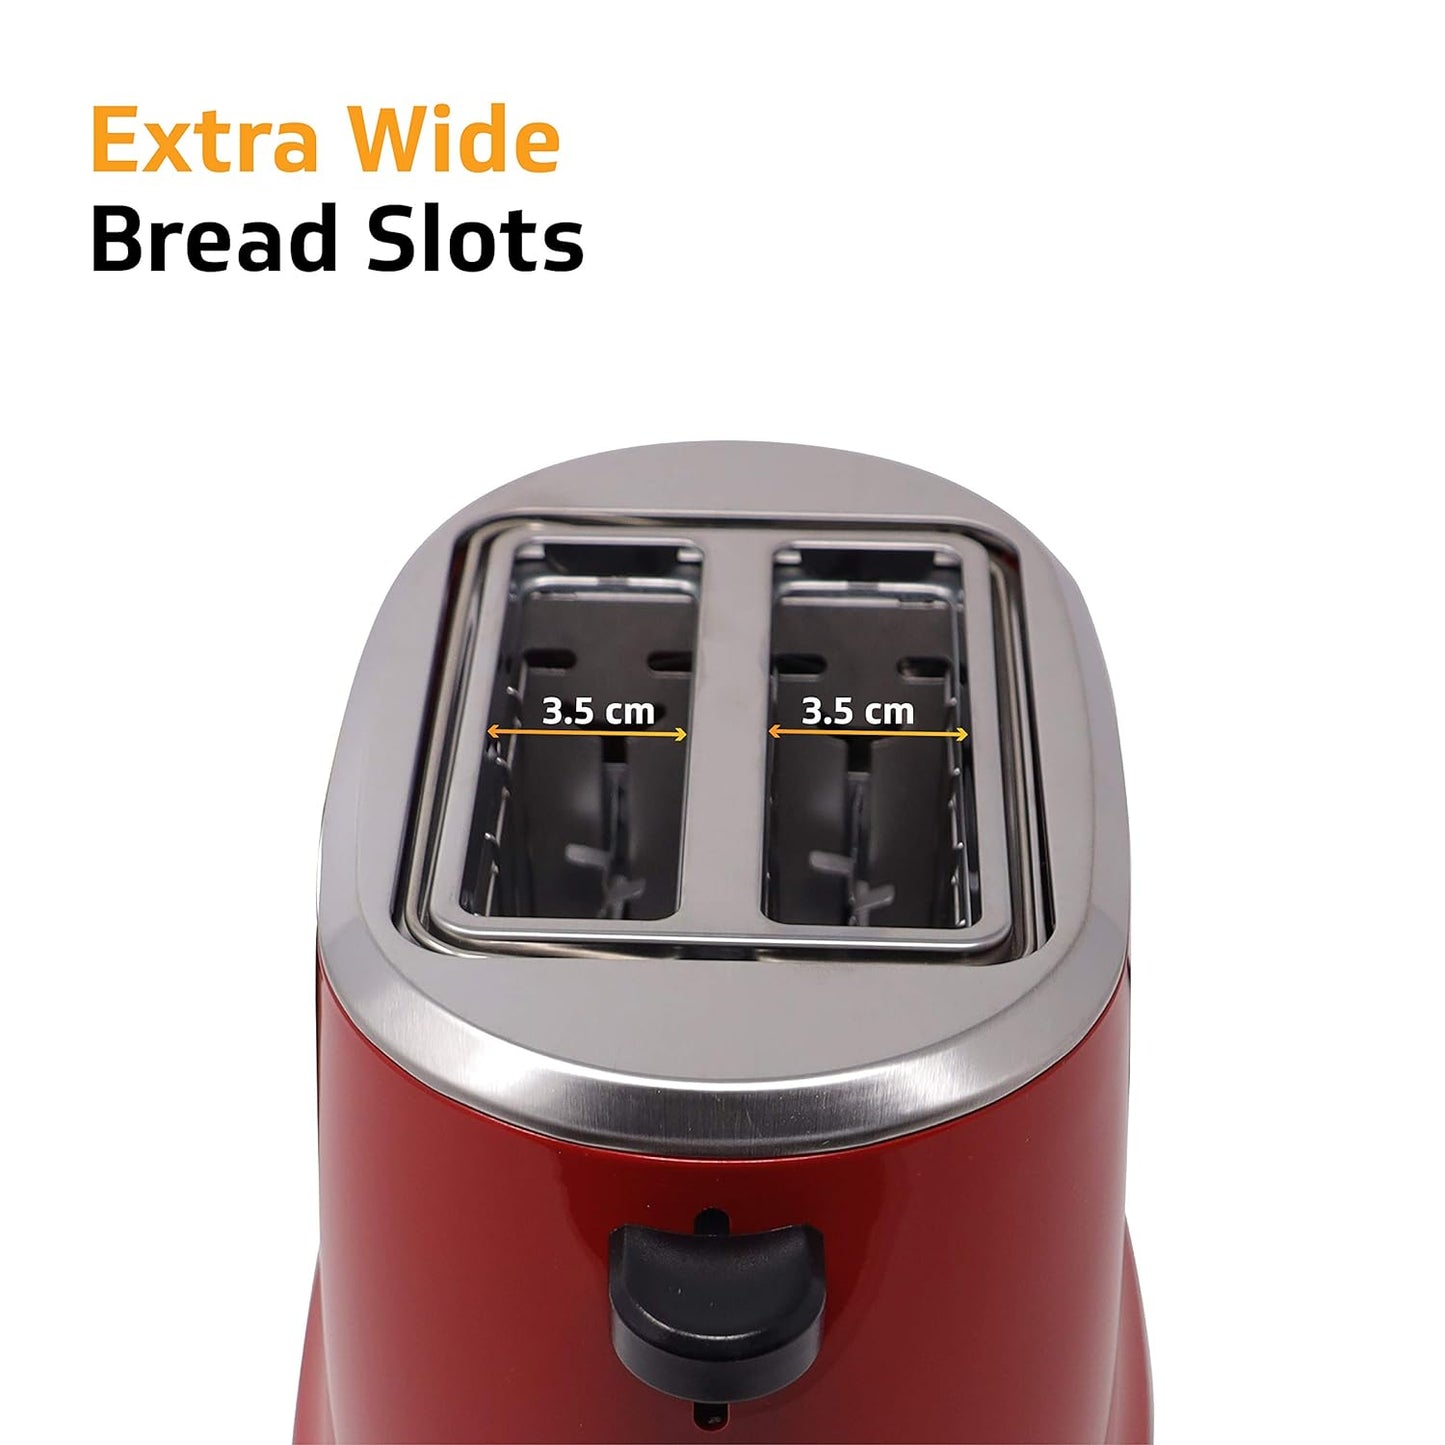 VT240 850 Watt 2-Slice Automatic Pop-Up Toaster with Bun Warmer, Variable Browning Levels and Defrost & Reheat Functions